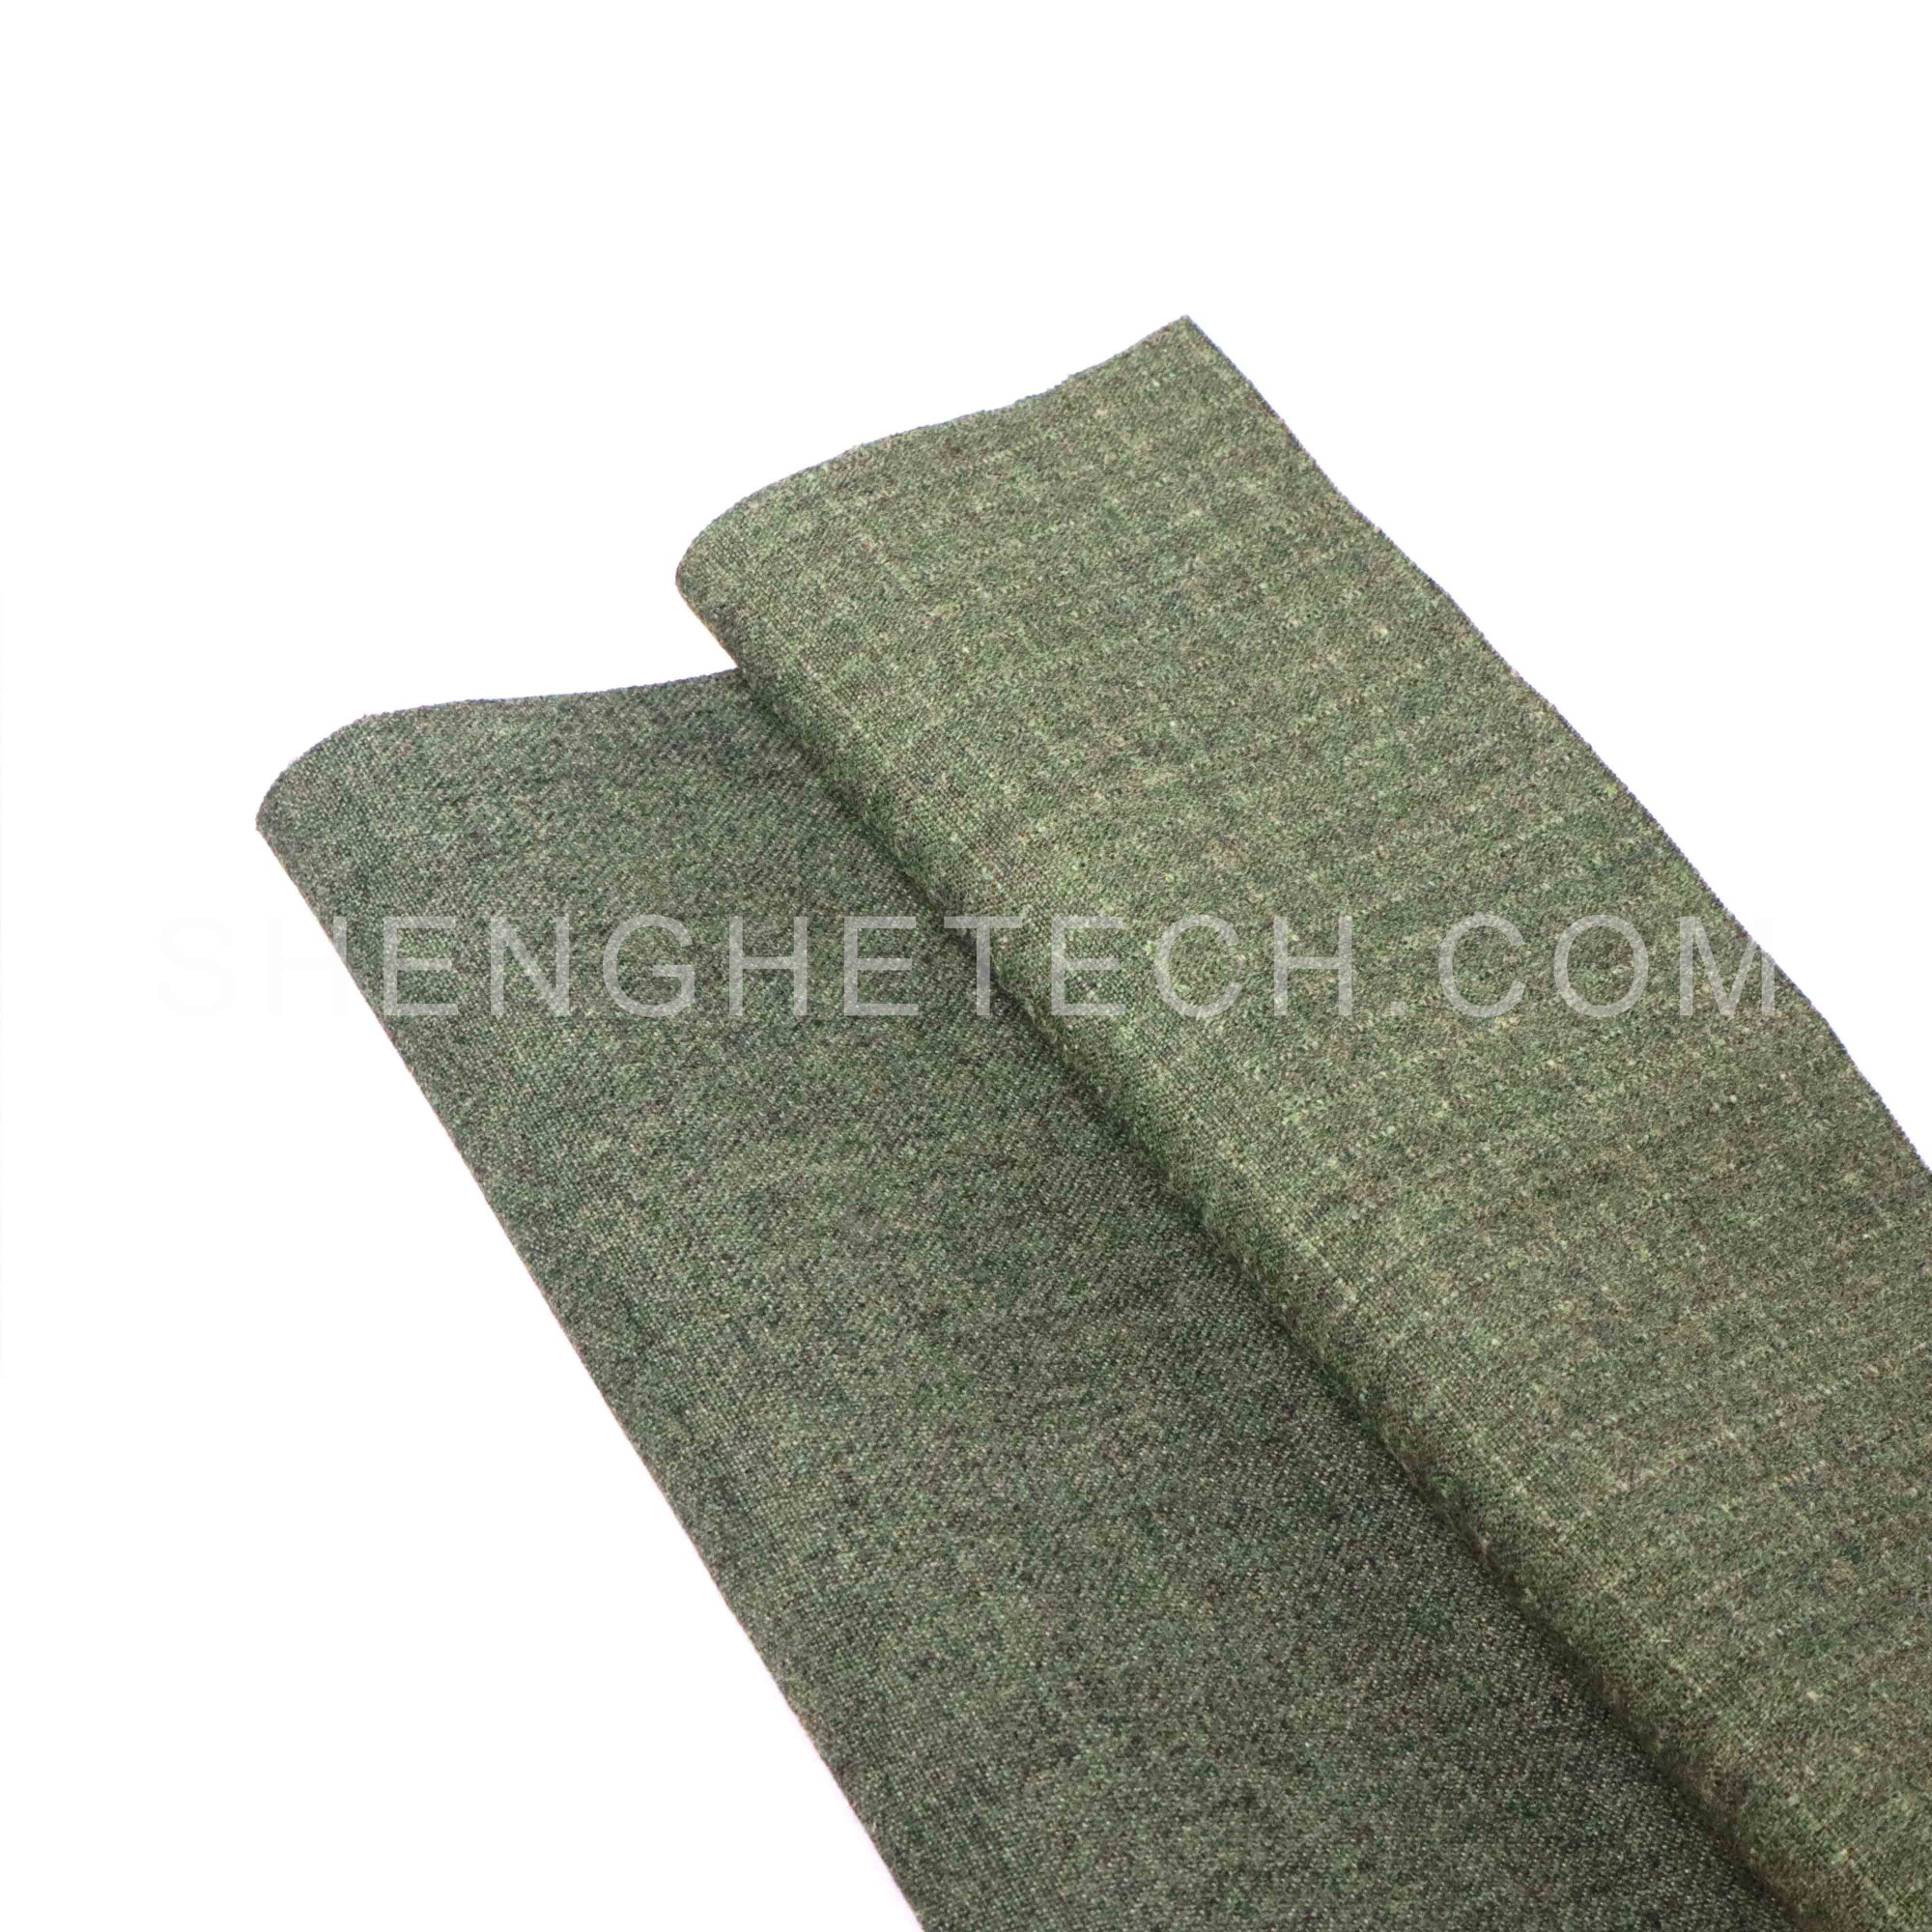 Pre-oxidized and para aramid blended fabric with aluminum coating